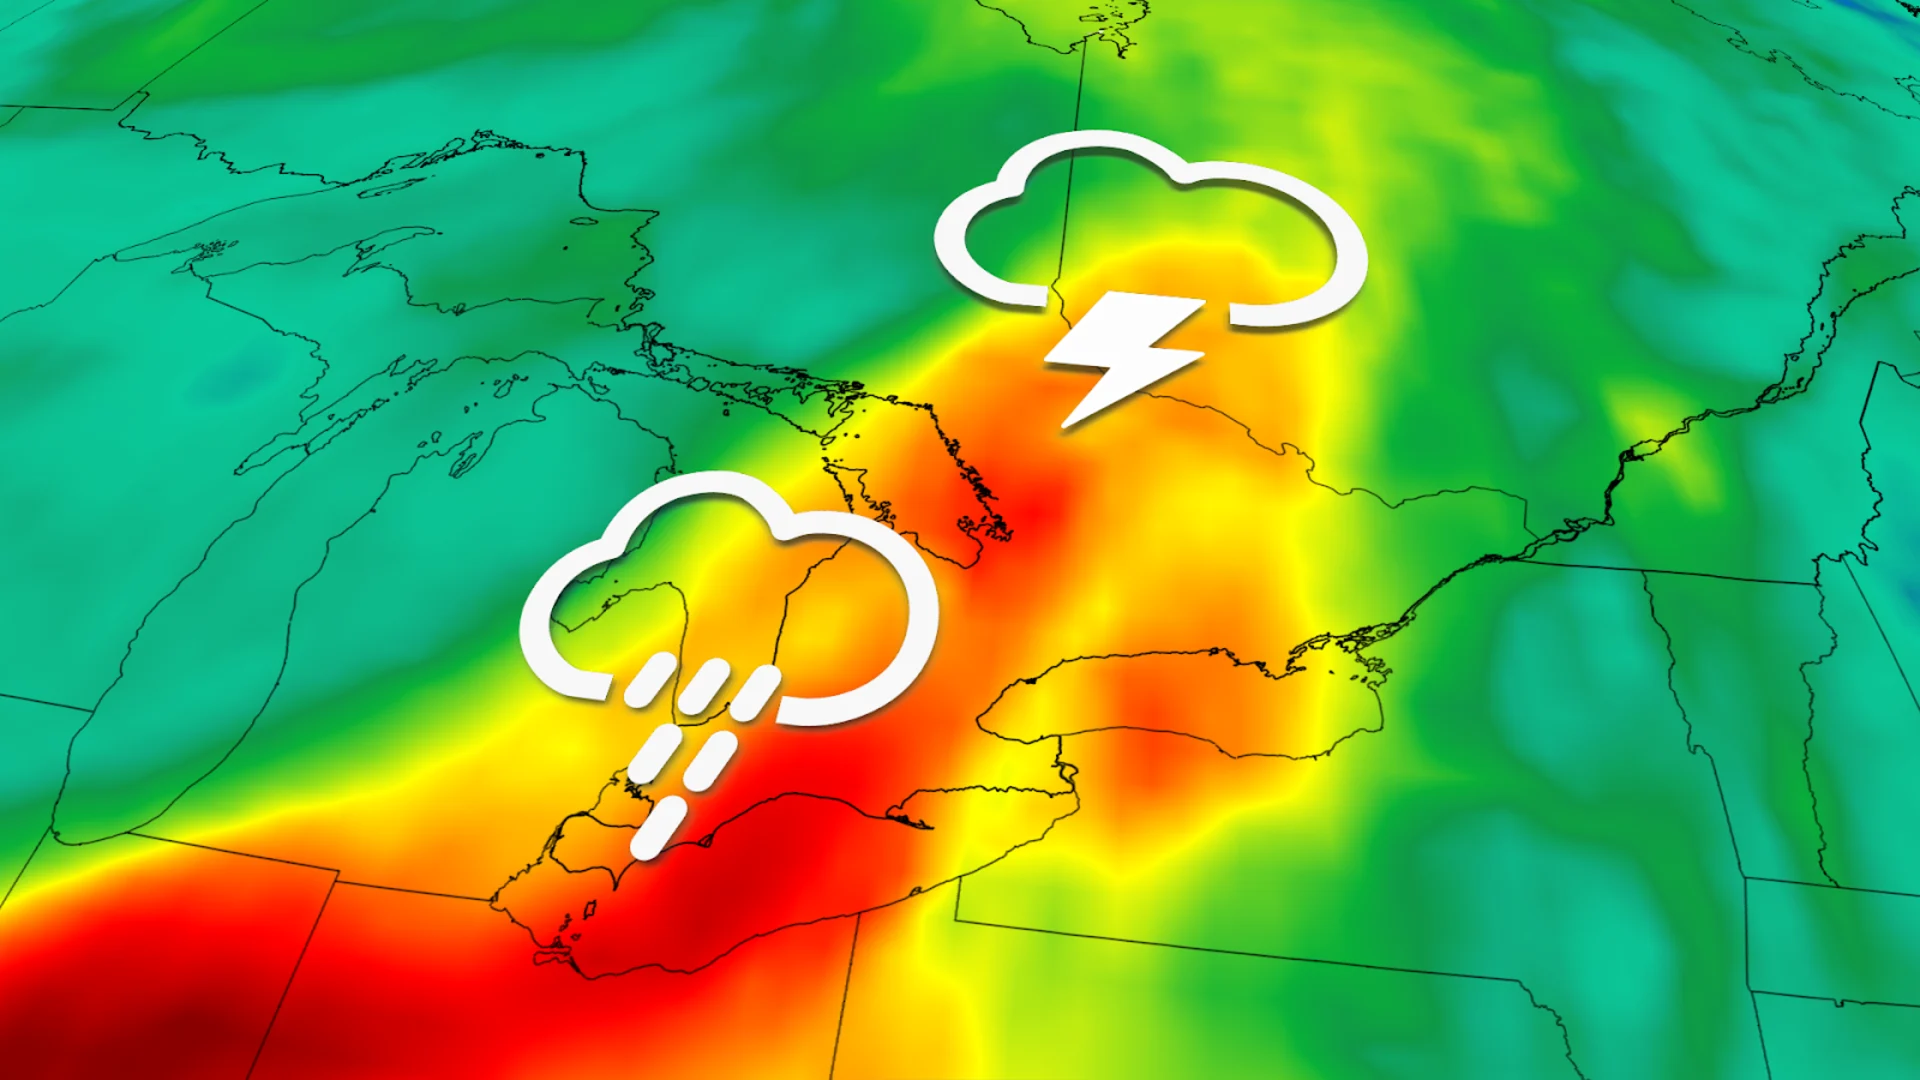 Thunderstorm, heavy rain risk bubbles up in Ontario. Forecast details, here